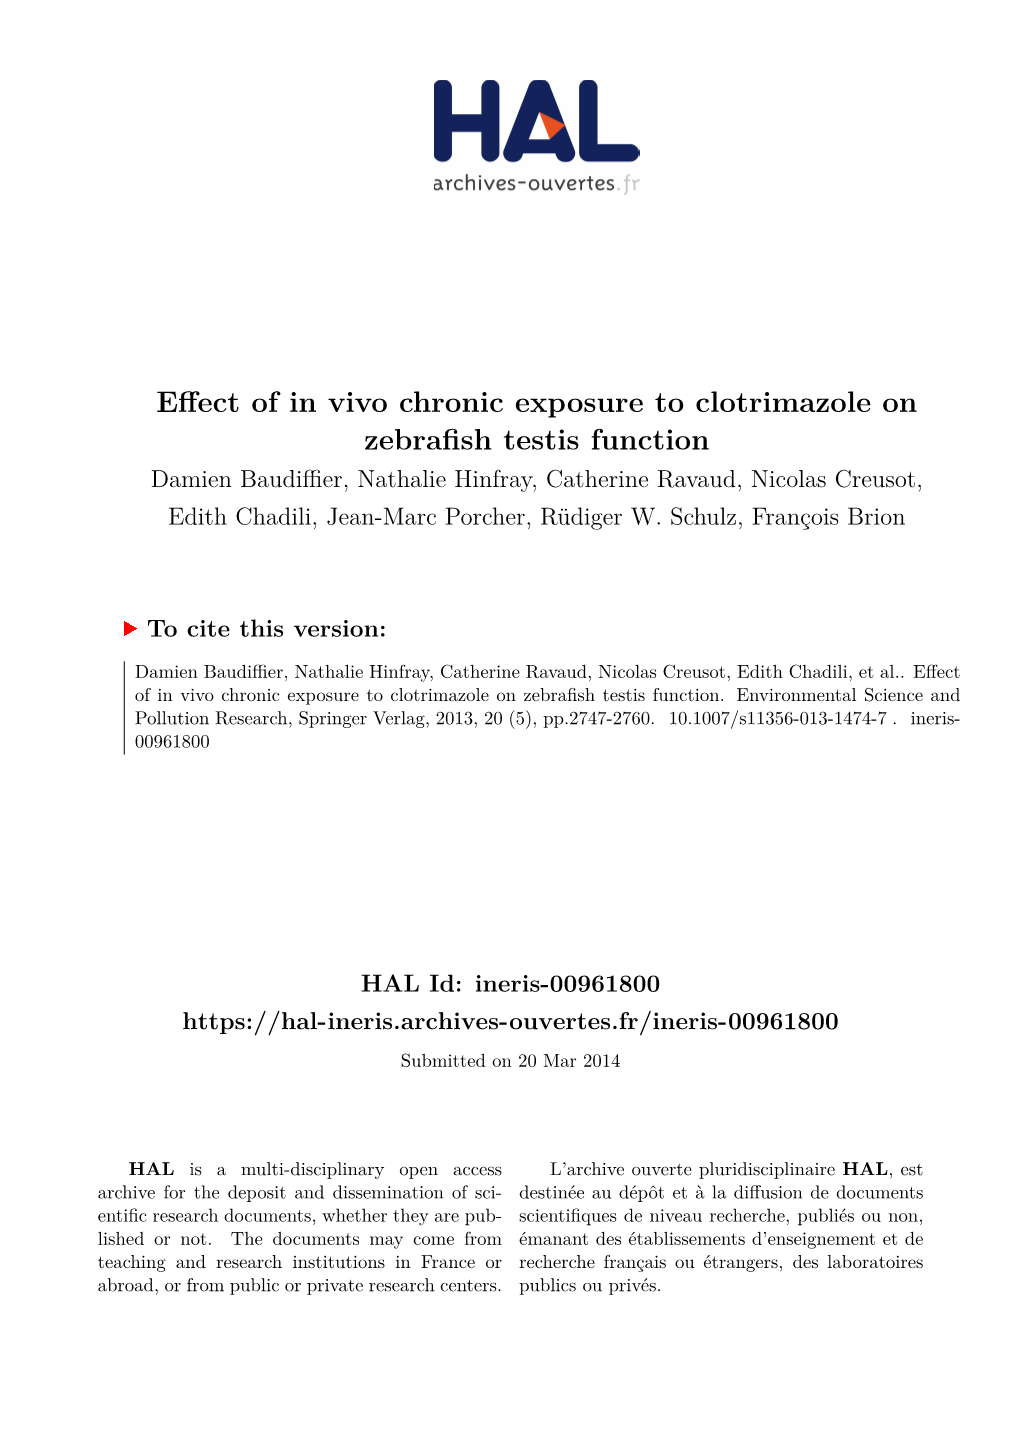 Effect of in Vivo Chronic Exposure to Clotrimazole On